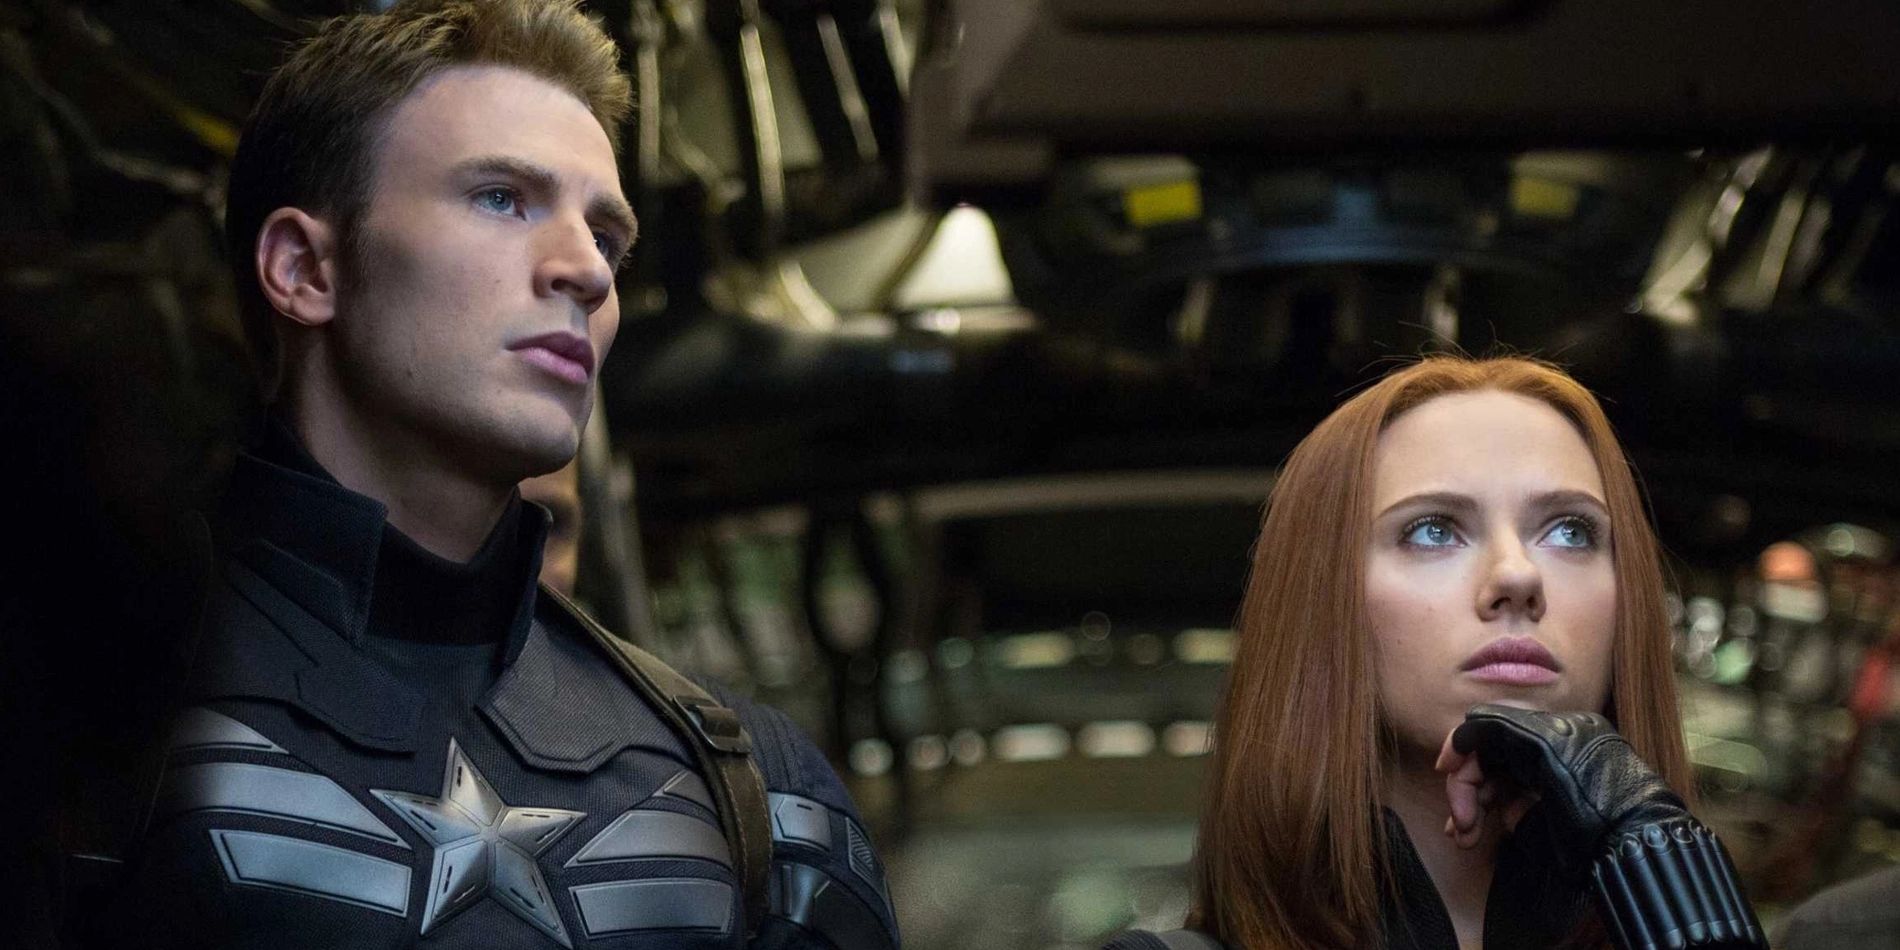 Chris Evans and Scarlett Johansson as Captain America and Black Widow